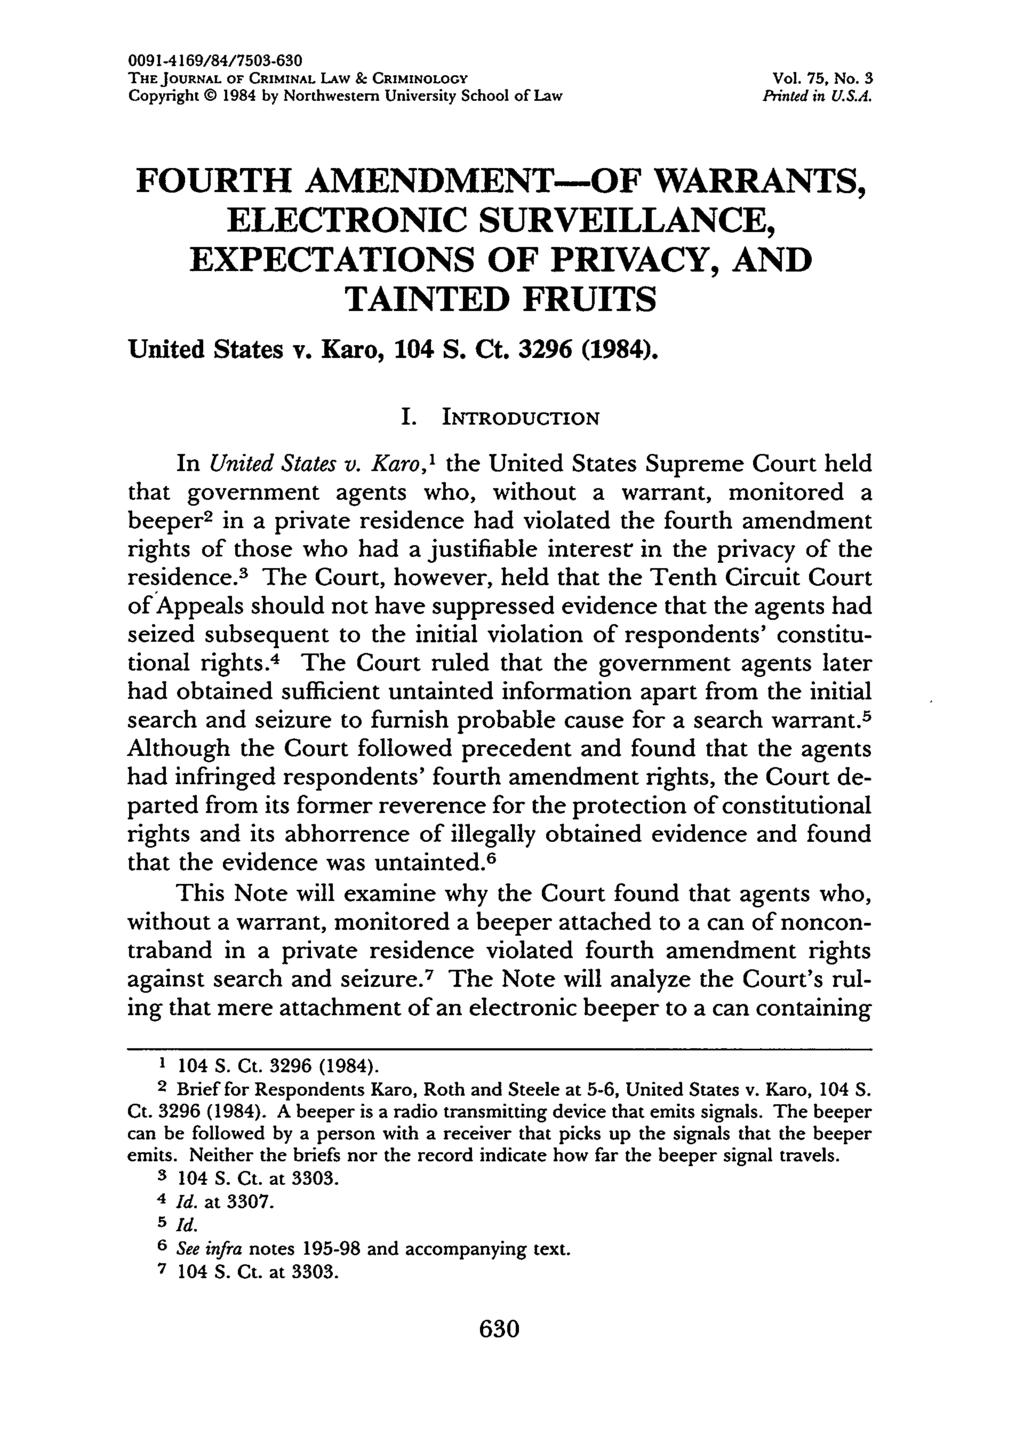 0091-4169/84/7503-630 THE JOURNAL OF CRIMINAL LAW & CRIMINOLOGY Vol. 75, No. 3 Copyright 0 1984 by Northwestern University School of Law Printed in U.S.A. FOURTH AMENDMENT-OF WARRANTS, ELECTRONIC SURVEILLANCE, EXPECTATIONS OF PRIVACY, AND TAINTED FRUITS United States v.